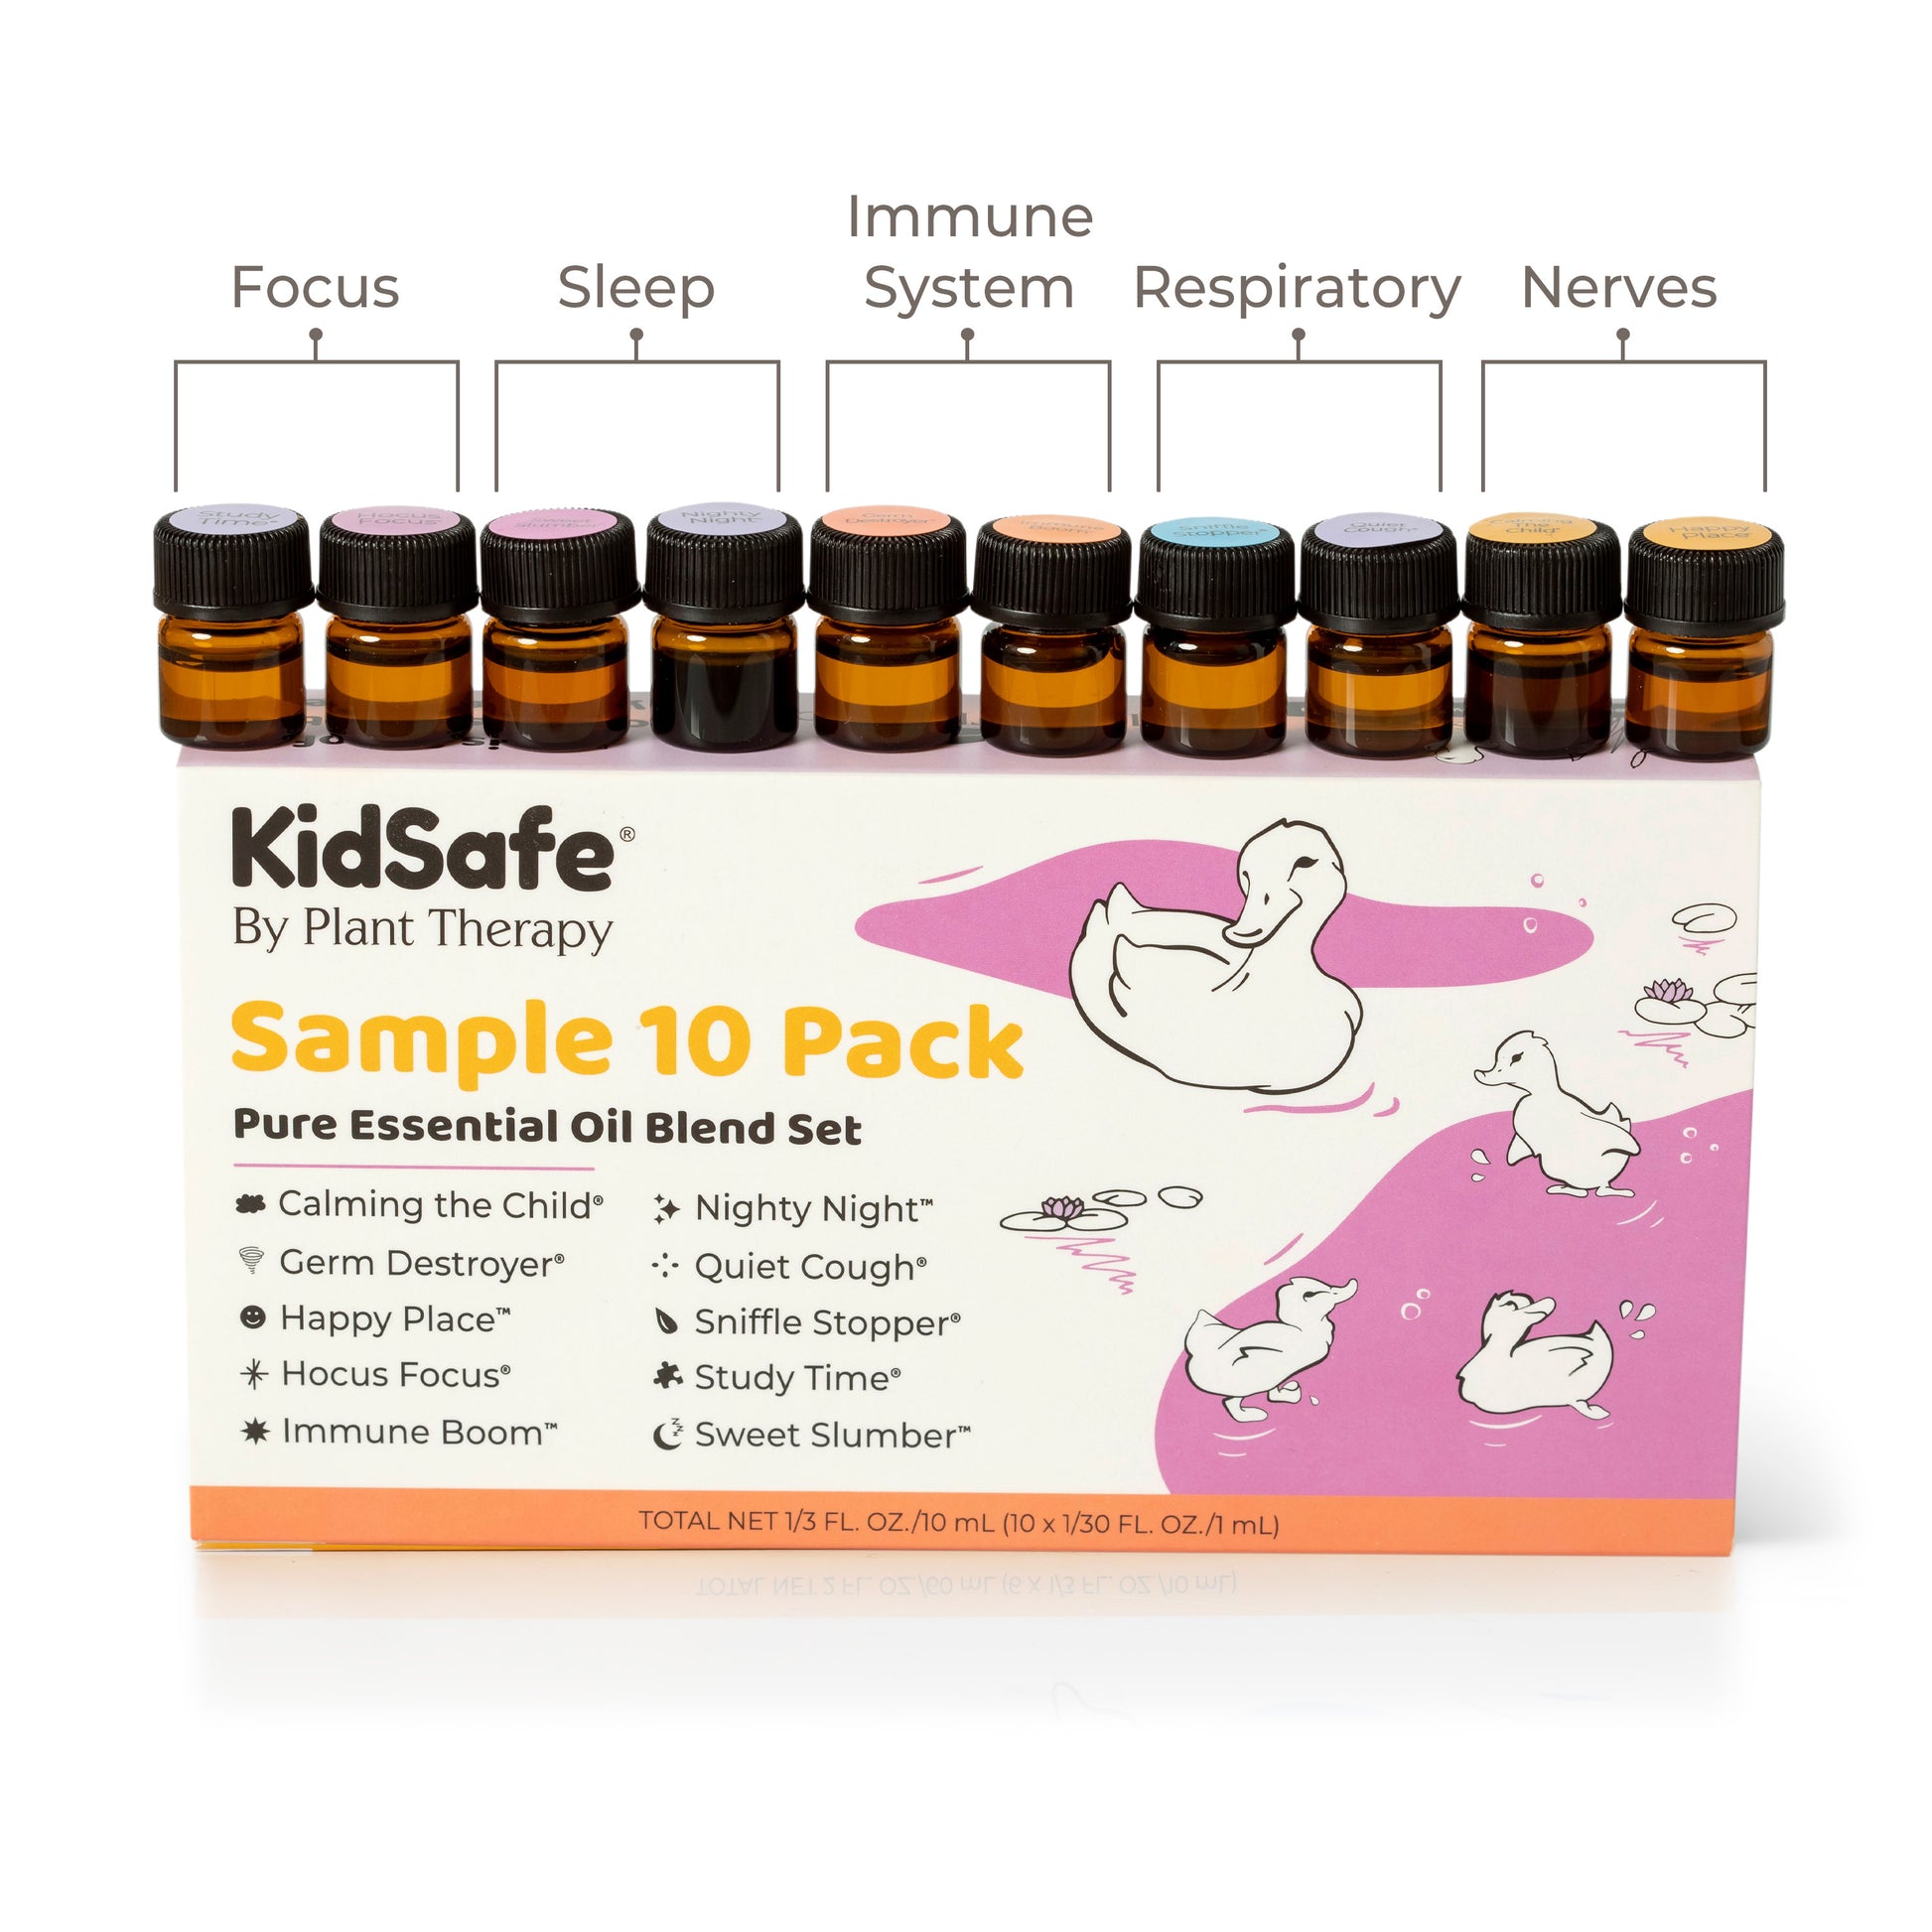  Plant Therapy KidSafe Skin Soother Essential Oil Blend 10 mL  (1/3 oz) 100% Pure, Undiluted, Therapeutic Grade : Health & Household